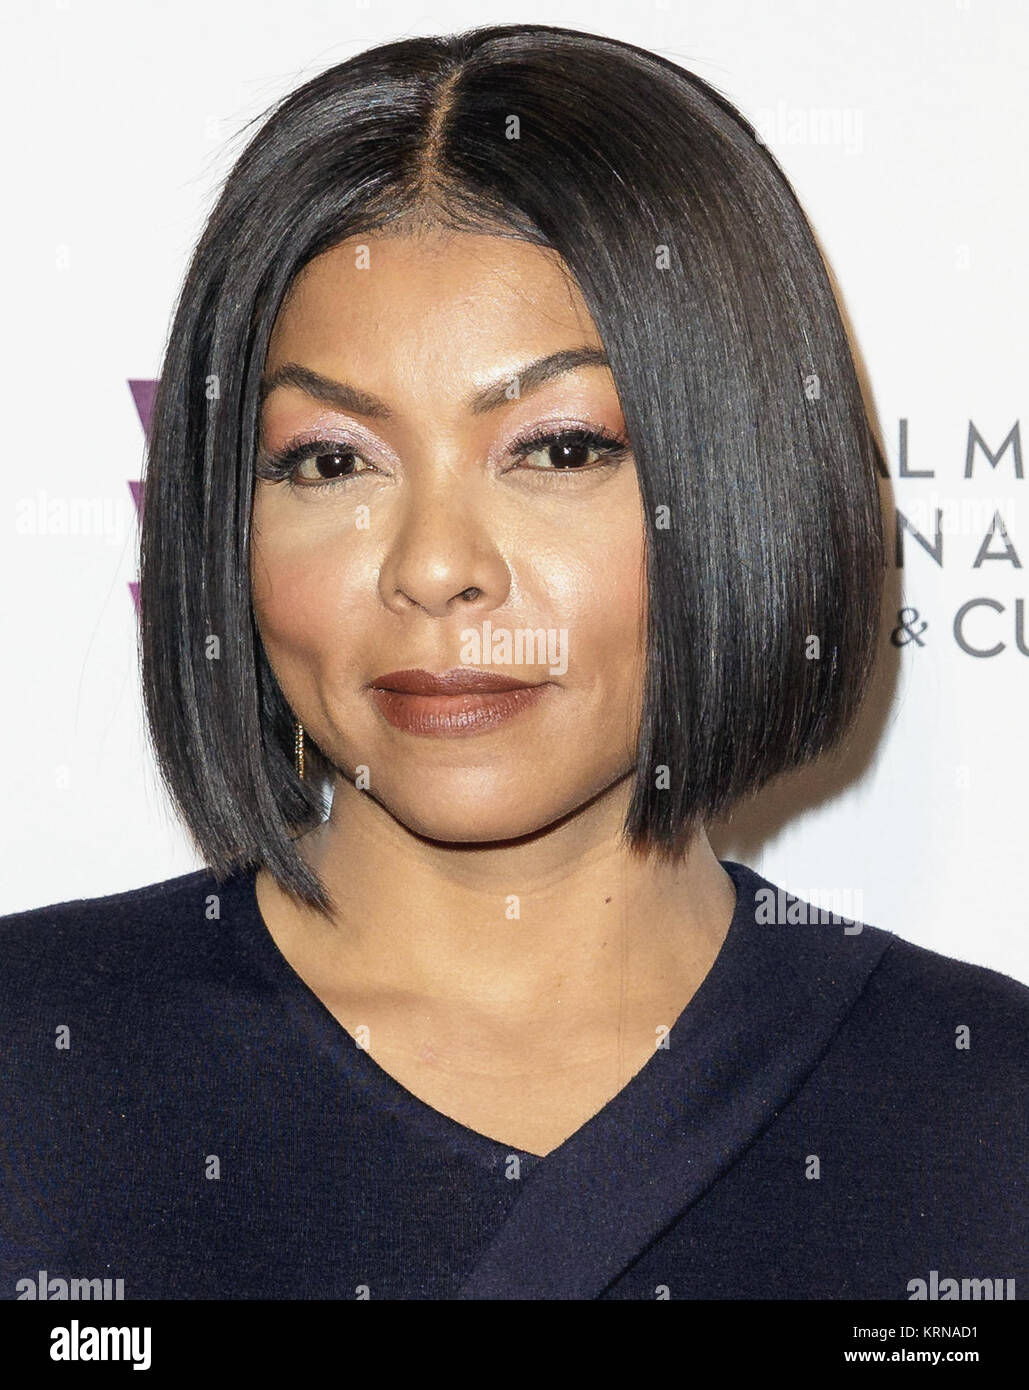 American actress and singer Taraji P. Henson arrives on the red carpet for a screening of the film “Hidden Figures” at the Smithsonian’s National Museum of African American History and Culture, Wednesday, Dec. 14, 2016 in Washington DC. The film is based on the book of the same title, by Margot Lee Shetterly, and chronicles the lives of Katherine Johnson, Dorothy Vaughan and Mary Jackson -- African-American women working at NASA as “human computers,” who were critical to the success of John Glenn’s Friendship 7 mission in 1962. Photo Credit: (NASA/Joel Kowsky) Taraji P. Henson 2016 Stock Photo